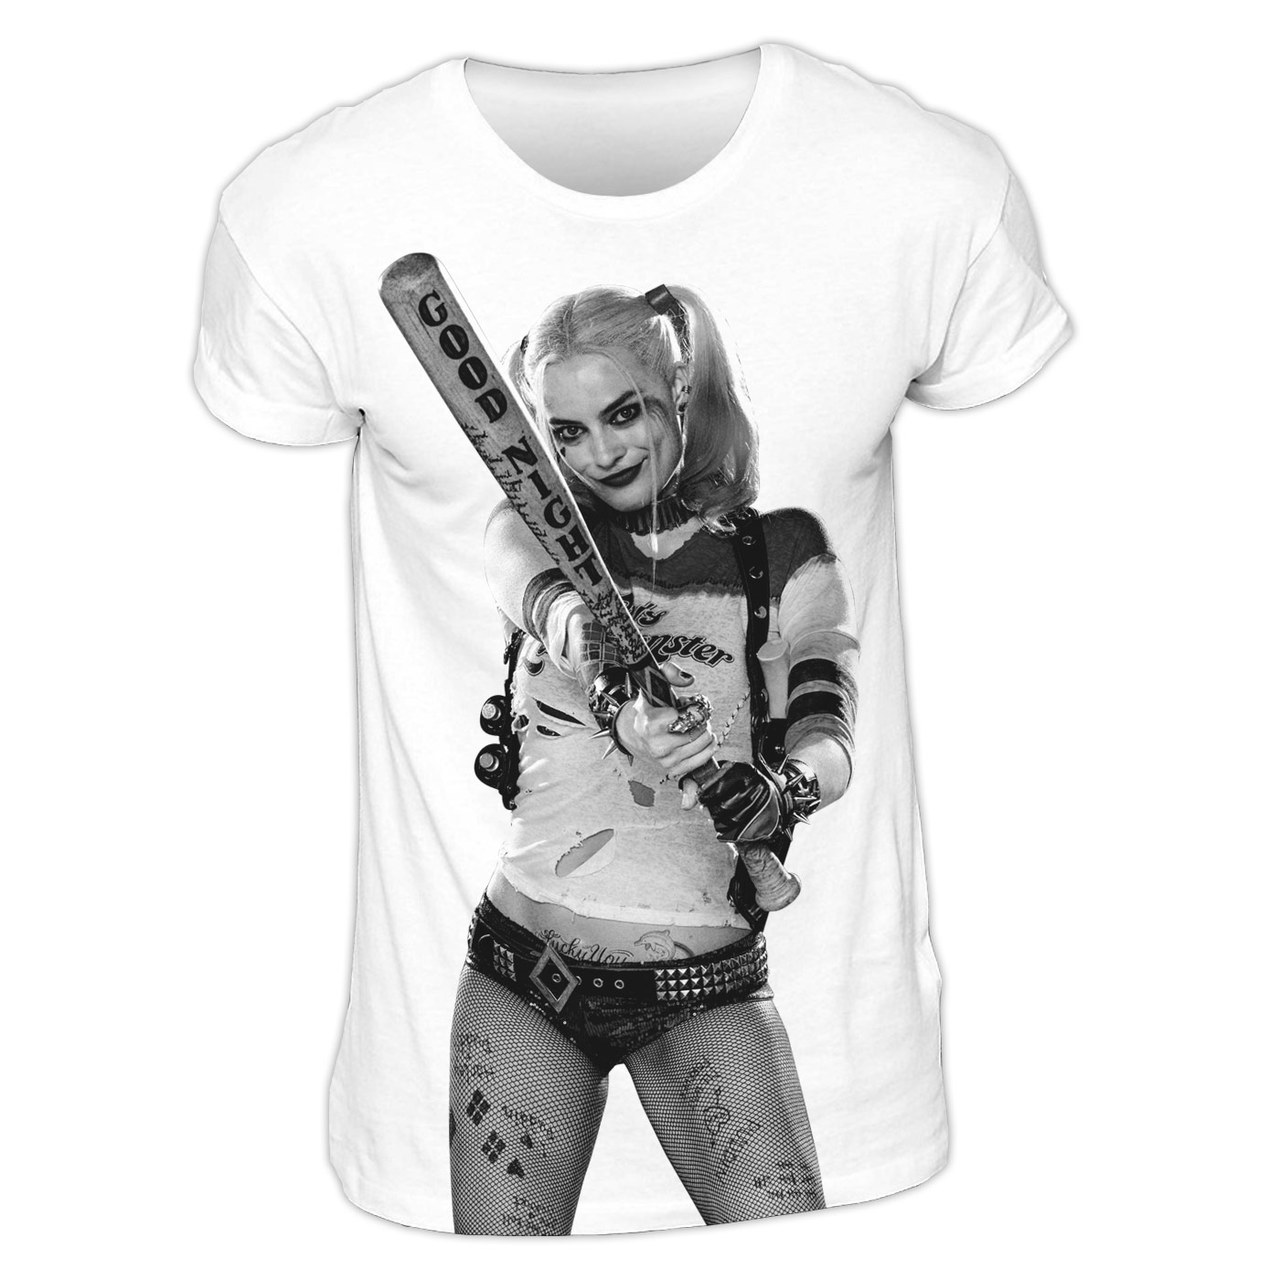 OFFICIAL LICENSED GRAFFITI SUBLIMATED T SHIRT HARLEY DC COMICS SUICIDE SQUAD